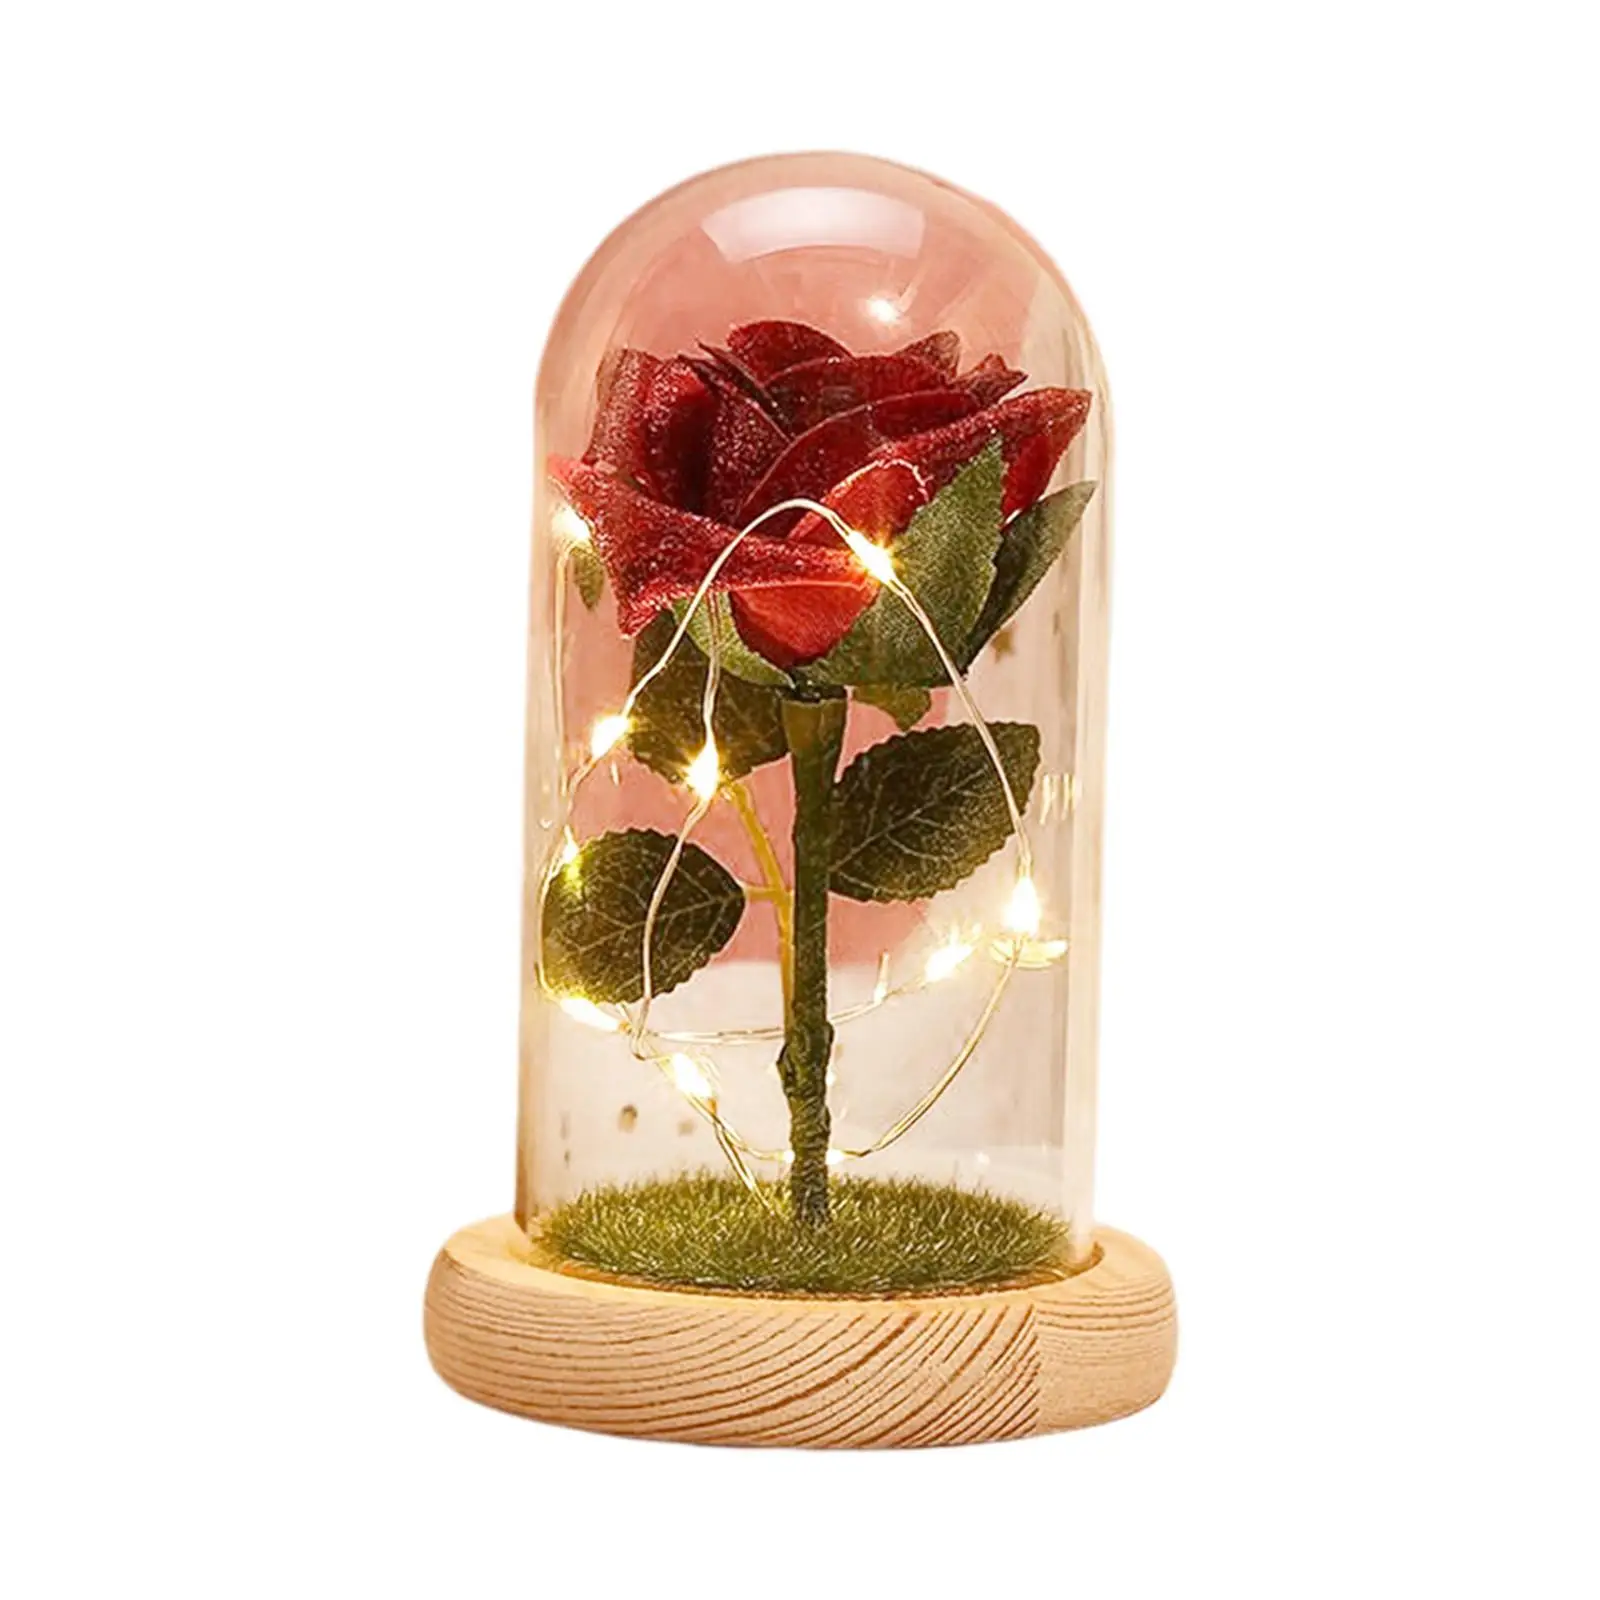 Unique Light up Rose Simulated Flowers W/ Light Artificial Flower Ornaments for Gift Girlfriend Home Decoration Women